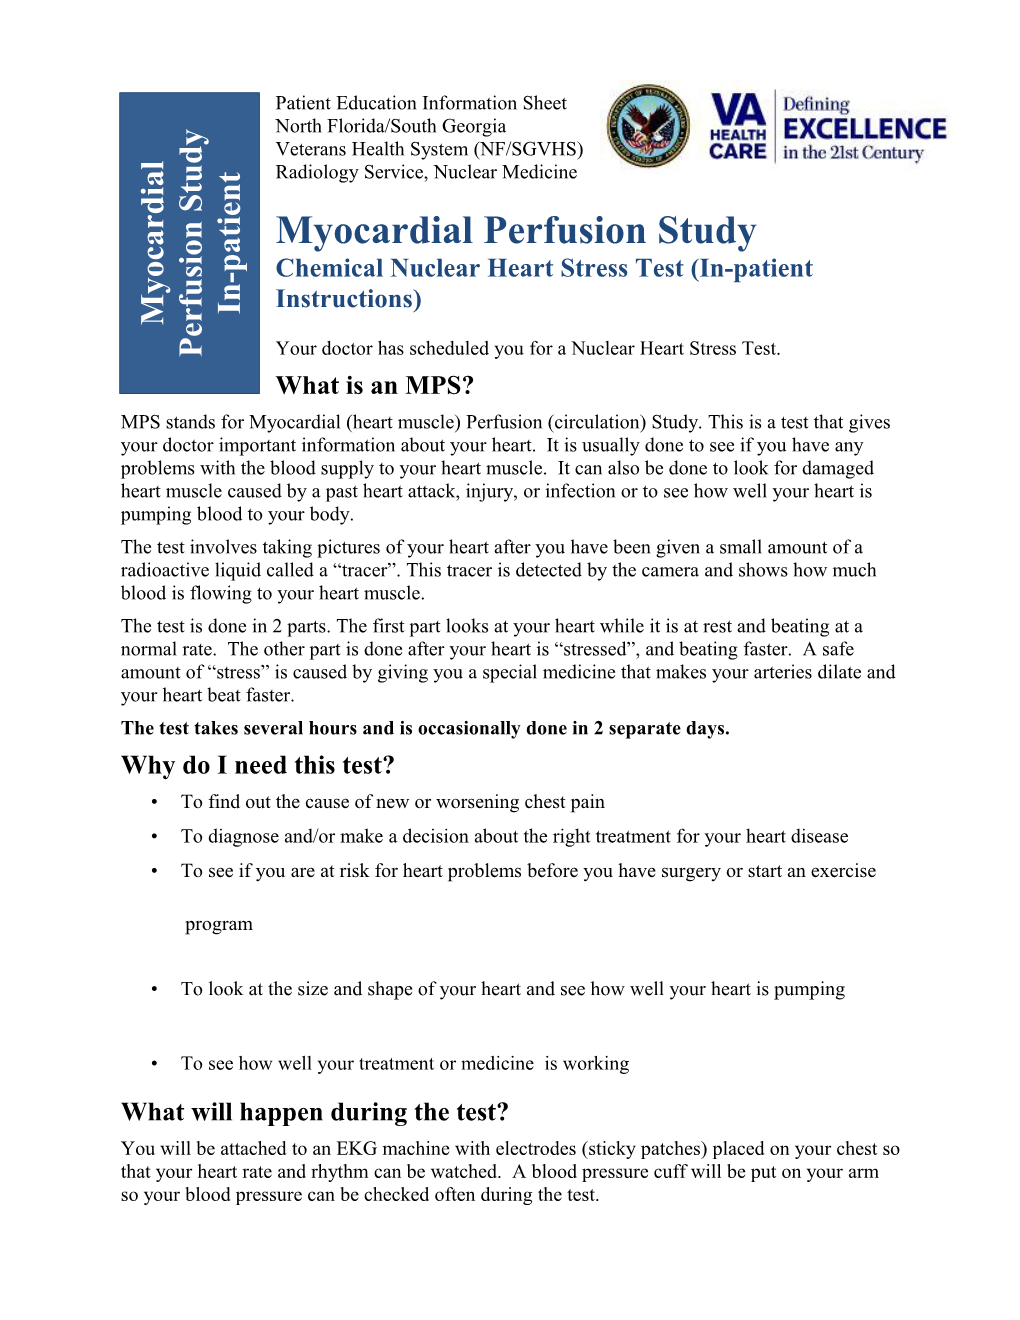 Myocardial Perfusion Study- Chemical Nuclear Heart Stress Test (In-Patient Instructions)